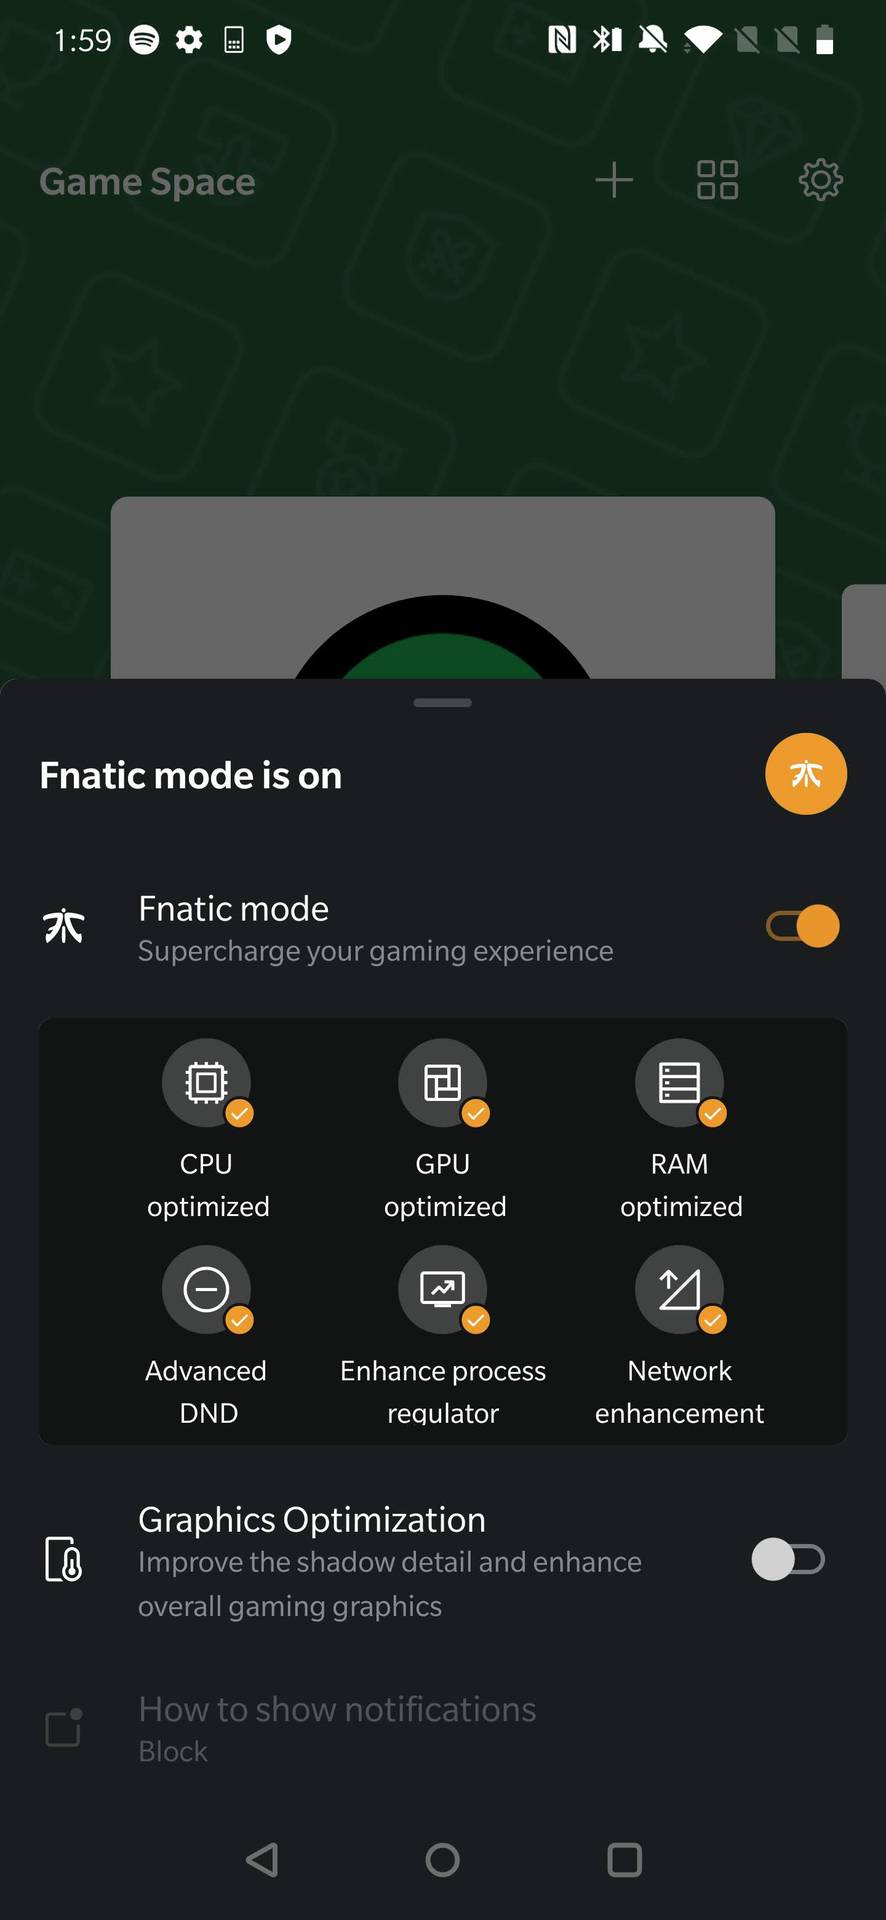 A screenshot of the OnePlus Game Space app showing what Fnatic Mode listening looks like.